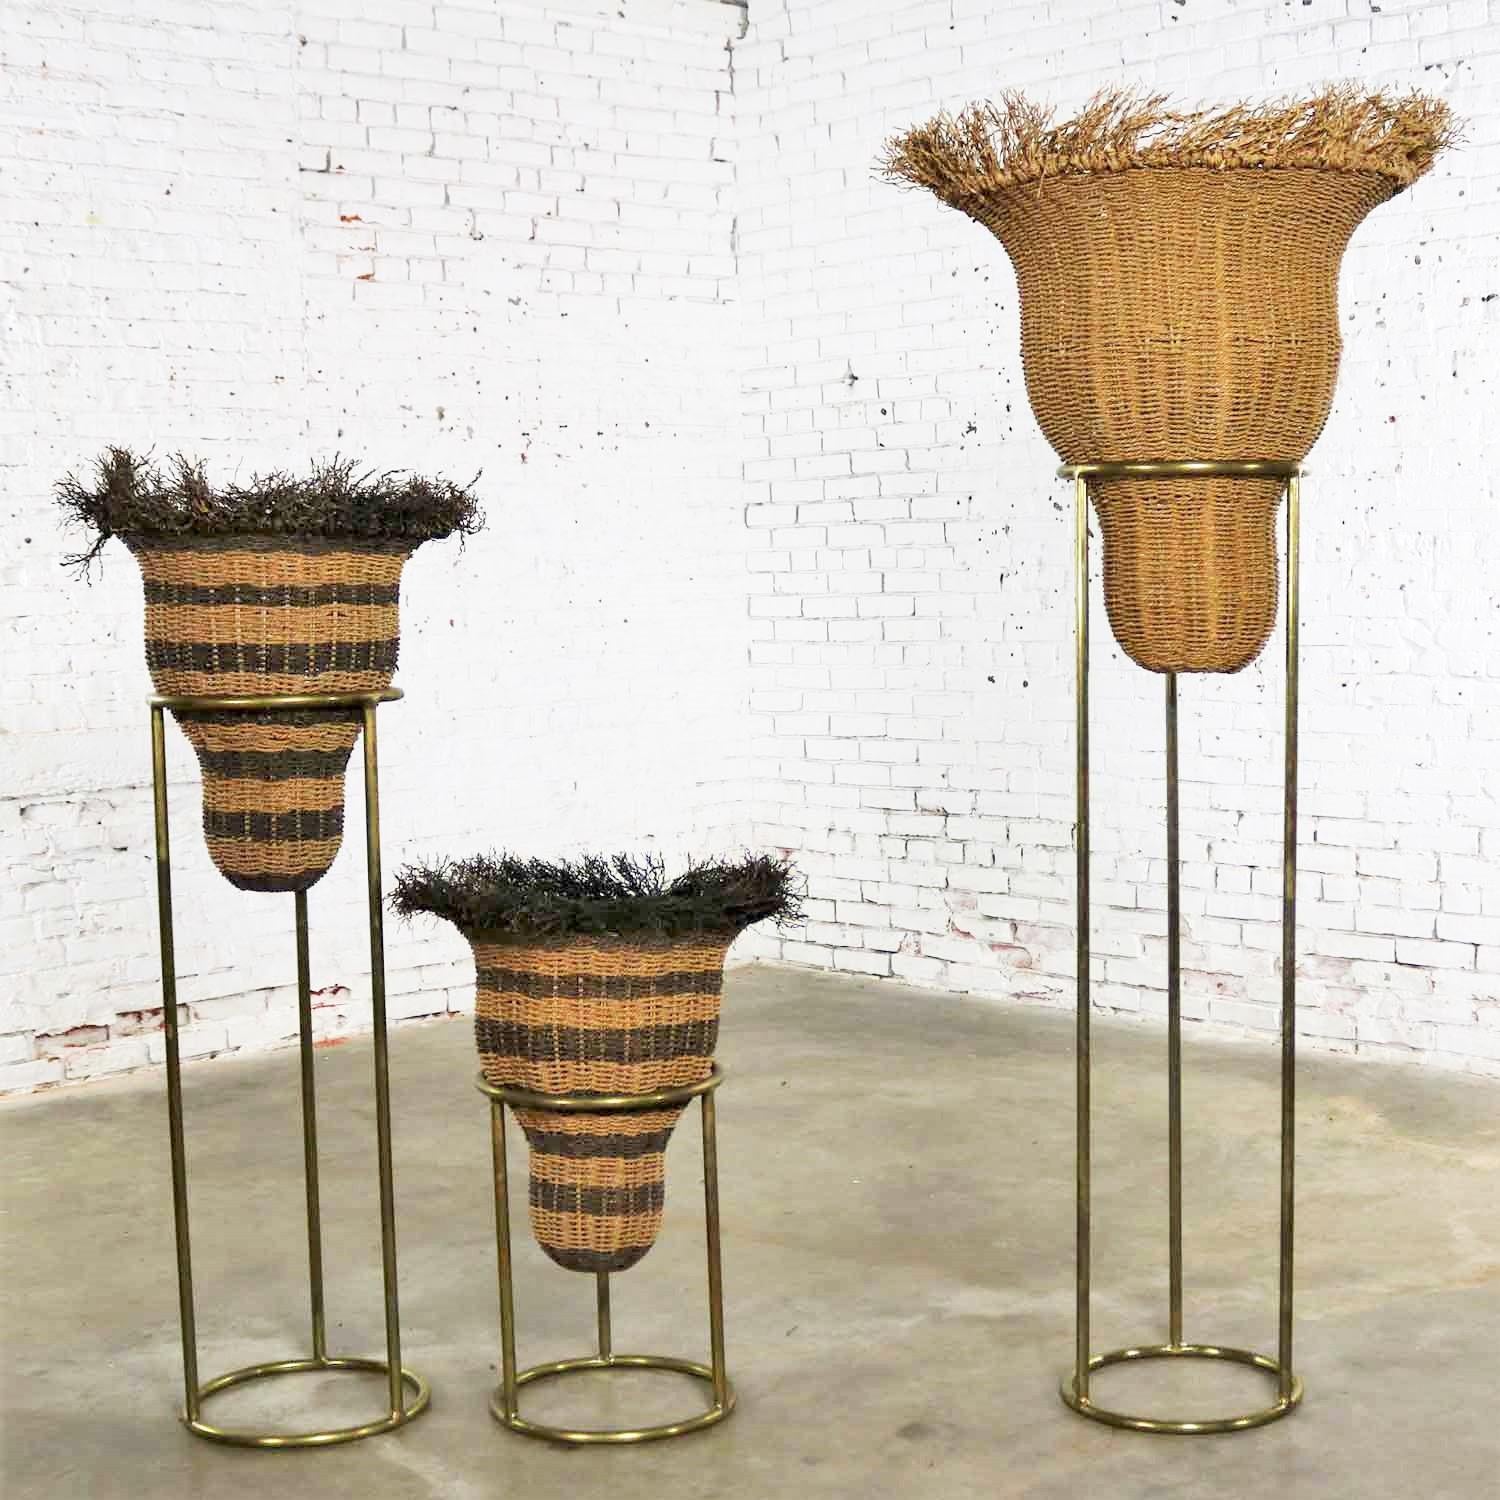 20th Century Round Brass Stands with Extra Large Basket Inserts for Plants, Flowers Set of 3